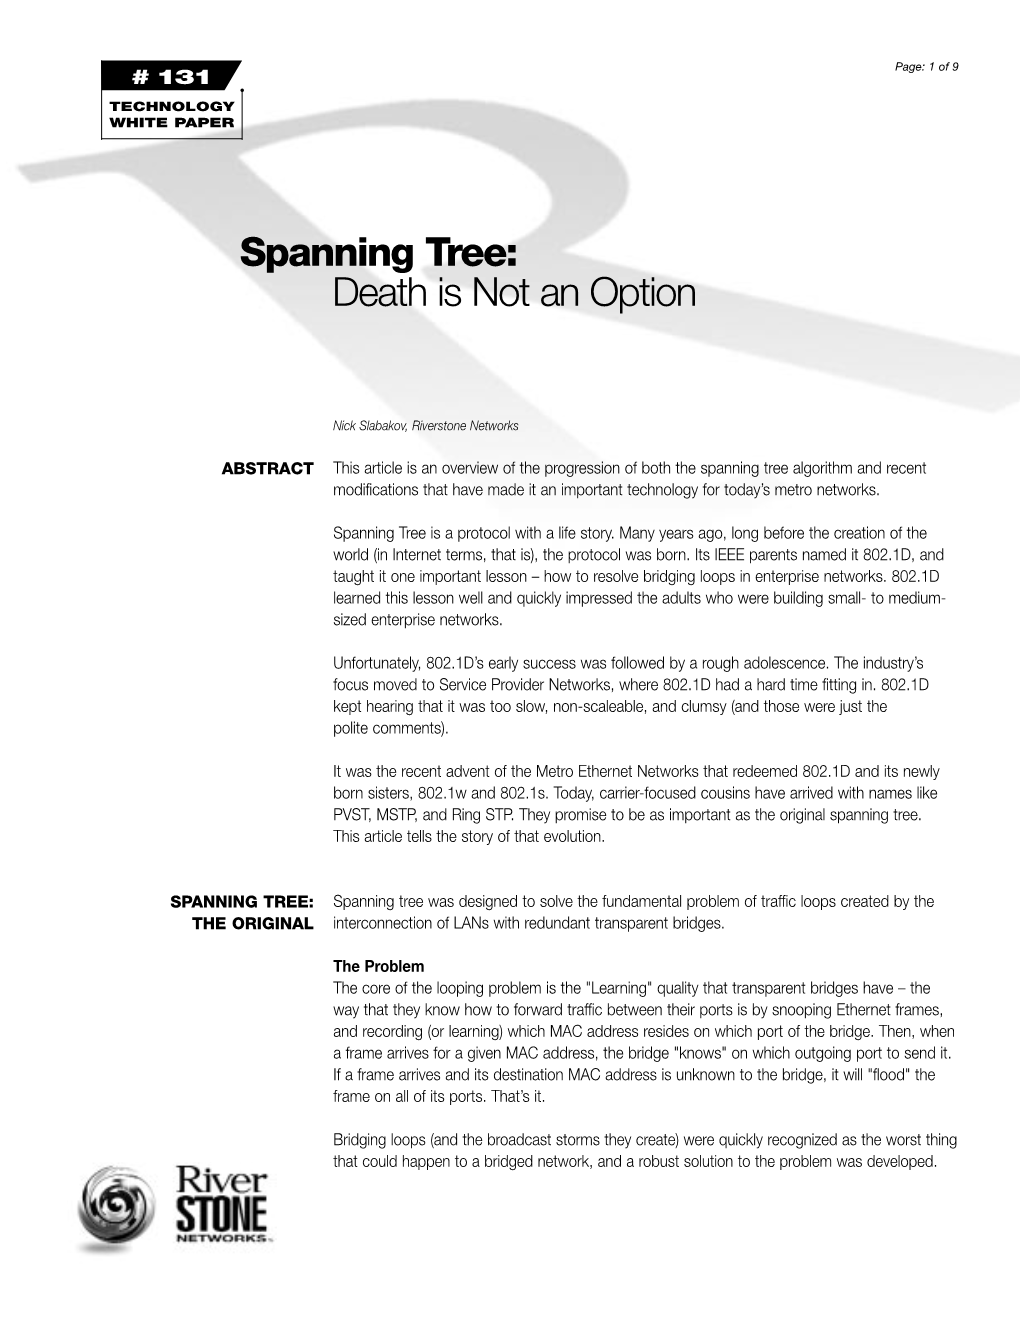 Spanning Tree: Death Is Not an Option